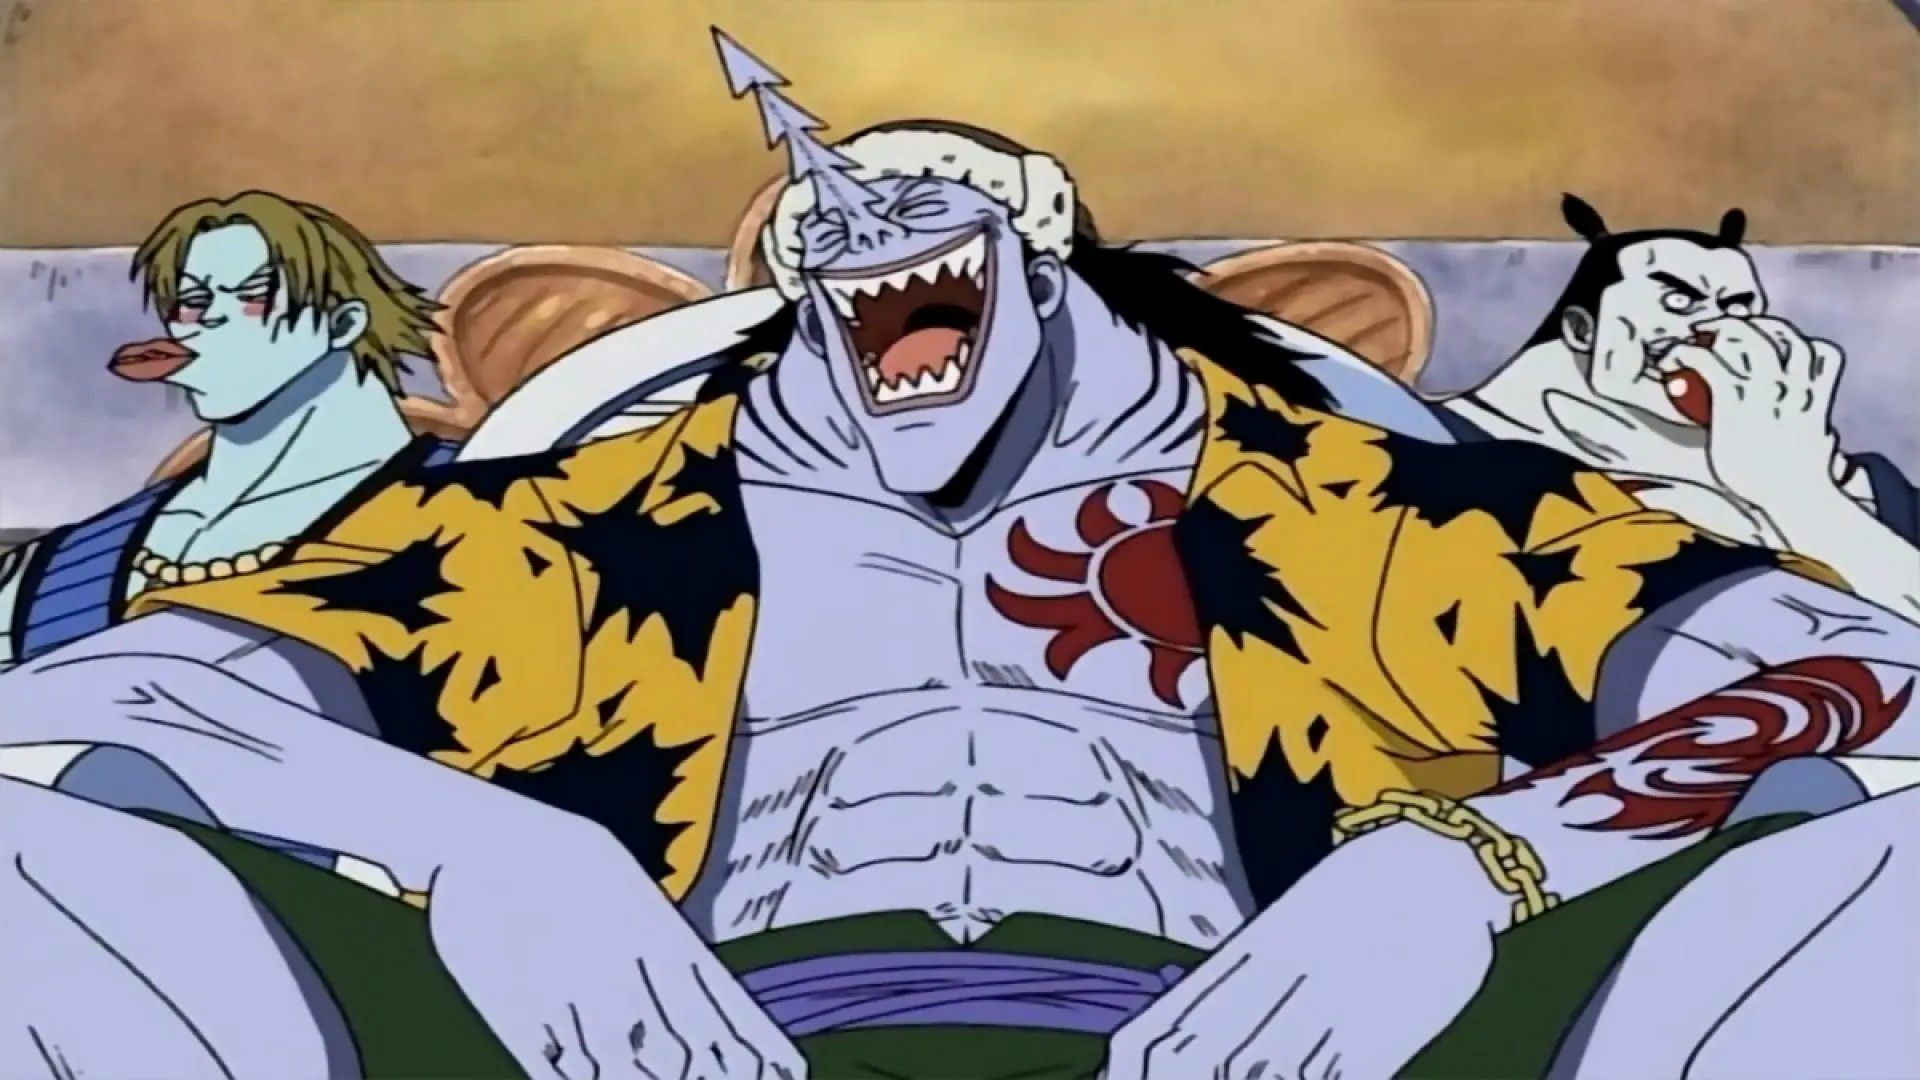 Arlong laughing with his lackies in 'One Piece'